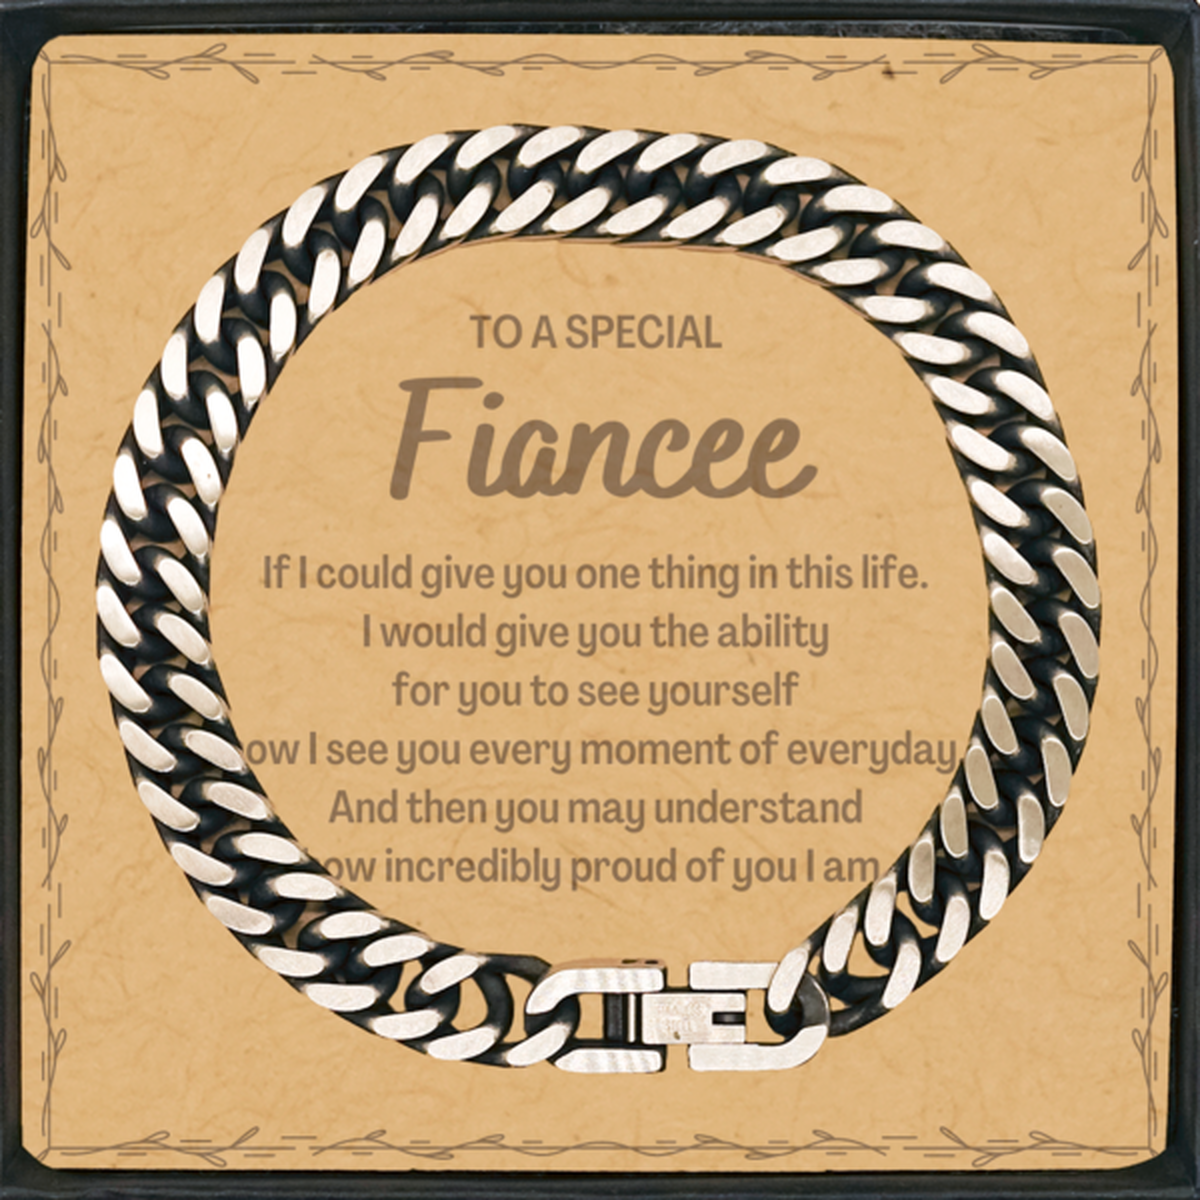 To My Fiancee Cuban Link Chain Bracelet, Gifts For Fiancee Message Card, Inspirational Gifts for Christmas Birthday, Epic Gifts for Fiancee To A Special Fiancee how incredibly proud of you I am